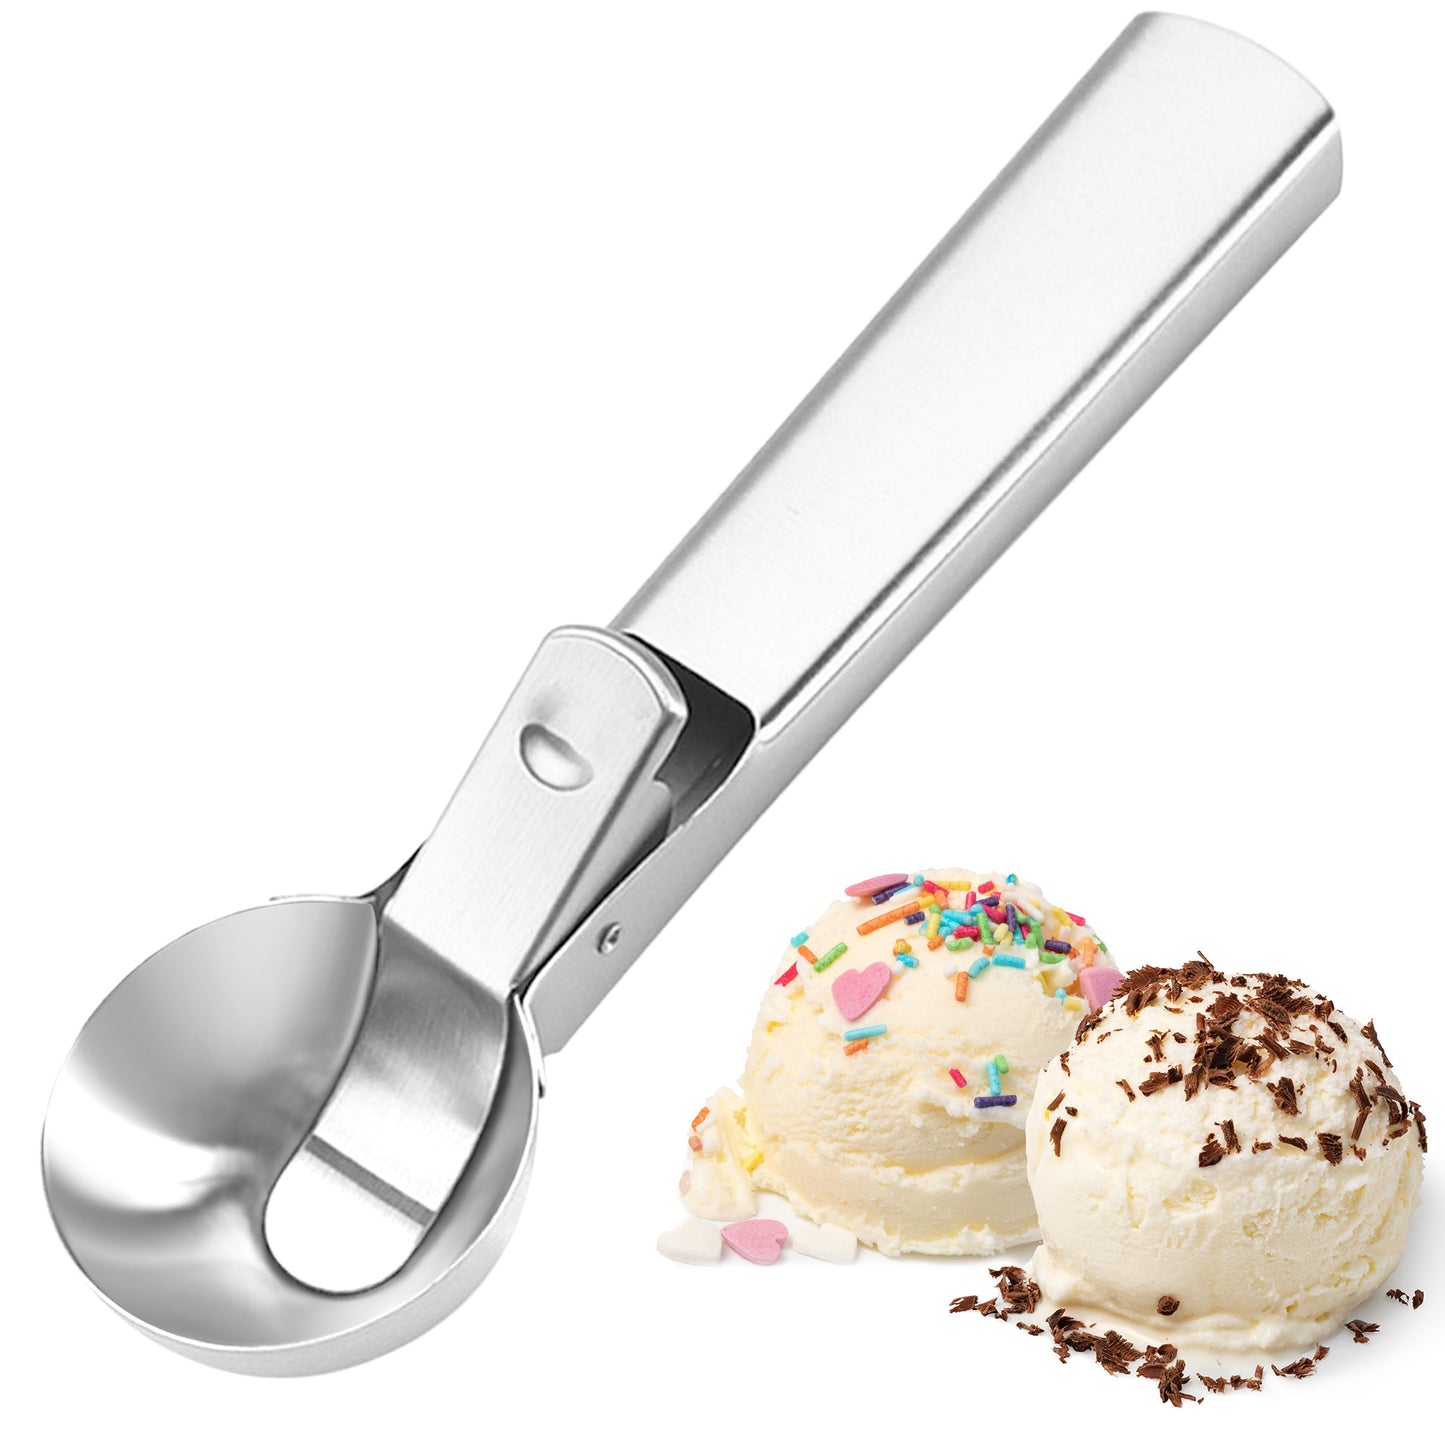 Stainless Steel Ice Cream Scooper, Cookie Dough Scoop with Trigger Spoon, Ice Cream Scoop, Silver